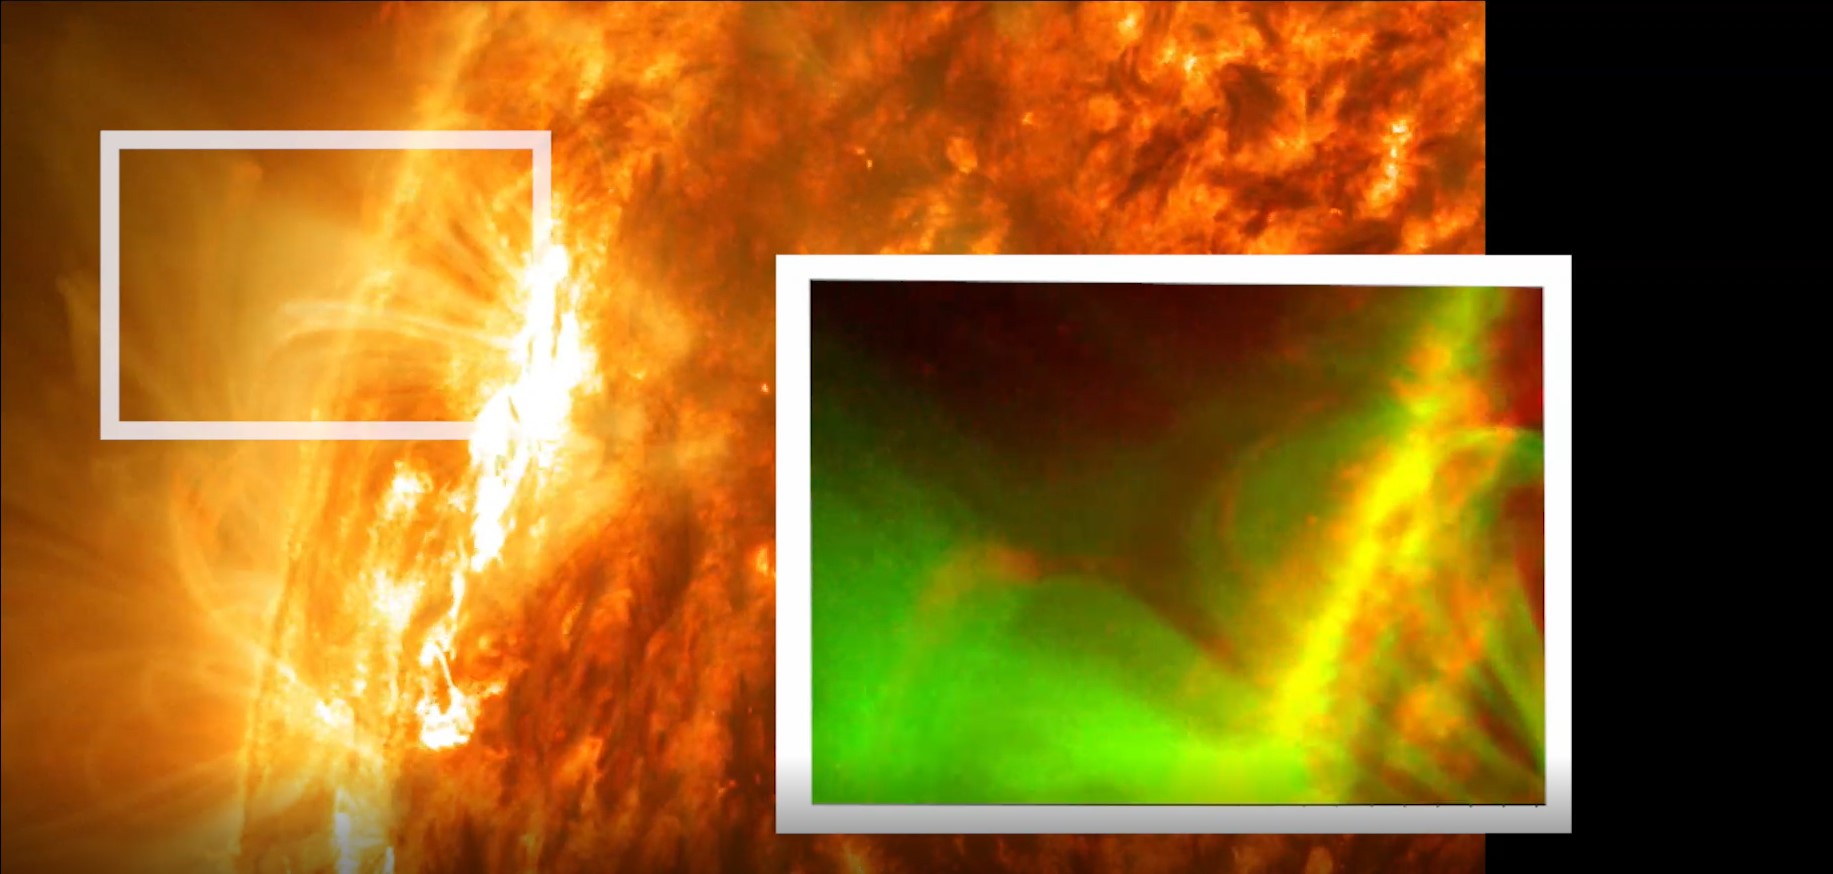 In the background a close-up image of the Sun shows a bright active region near the Sun’s limb. A white rectangle outlines a portion of the Sun with its bottom right corner centered on the active region. On the right a rectangular inset image shows swirls of green, yellow, and orange extending from the lower right toward the top and left.